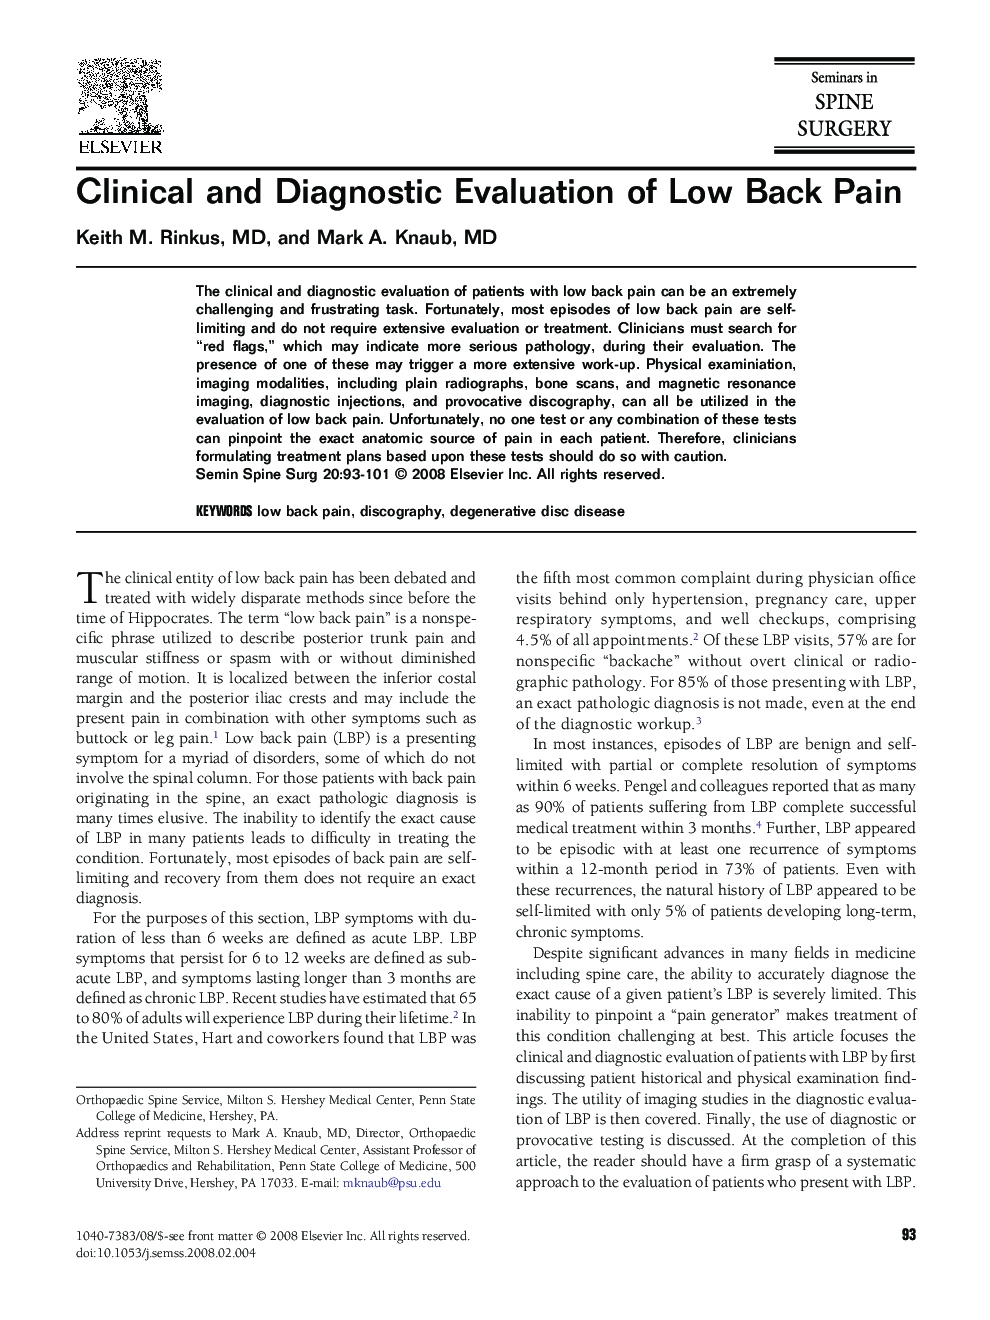 Clinical and Diagnostic Evaluation of Low Back Pain